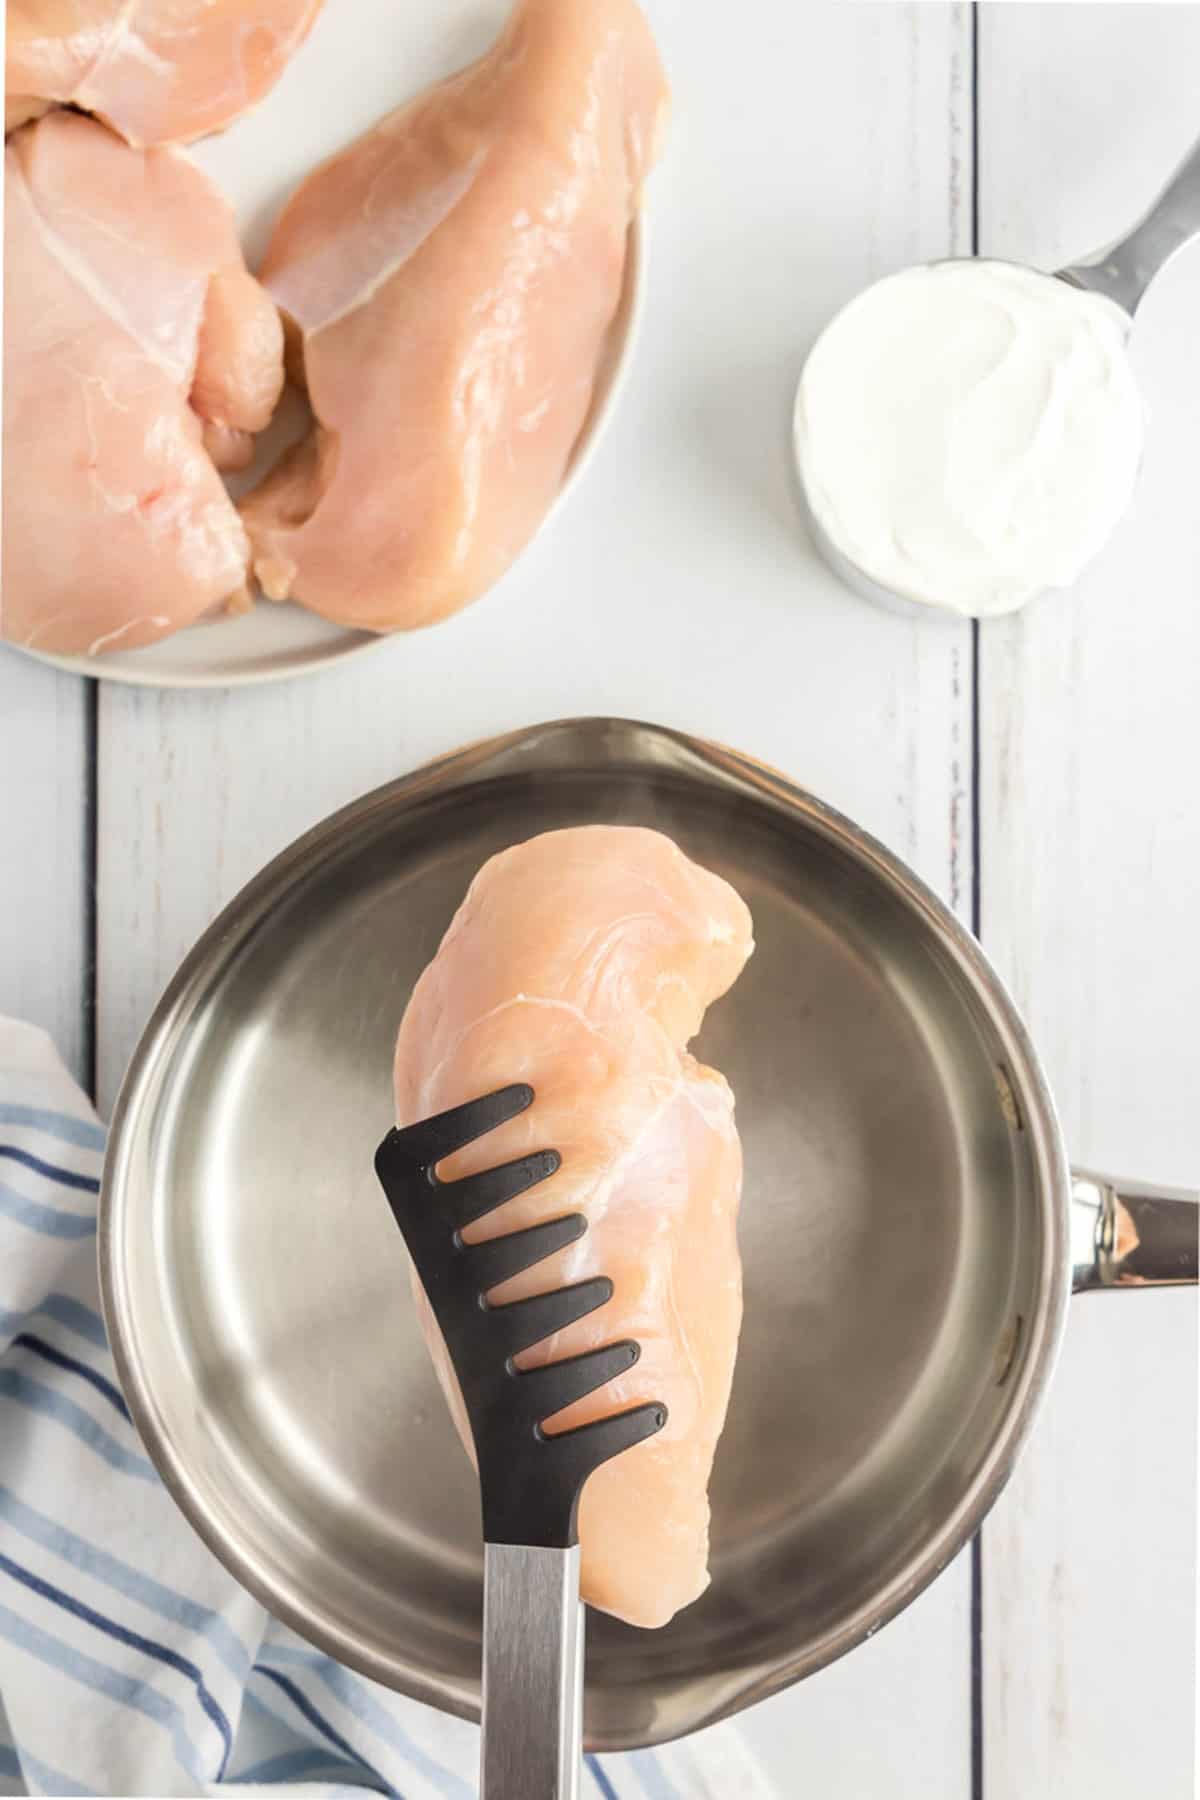 Lifting chicken breast into water in saucepan